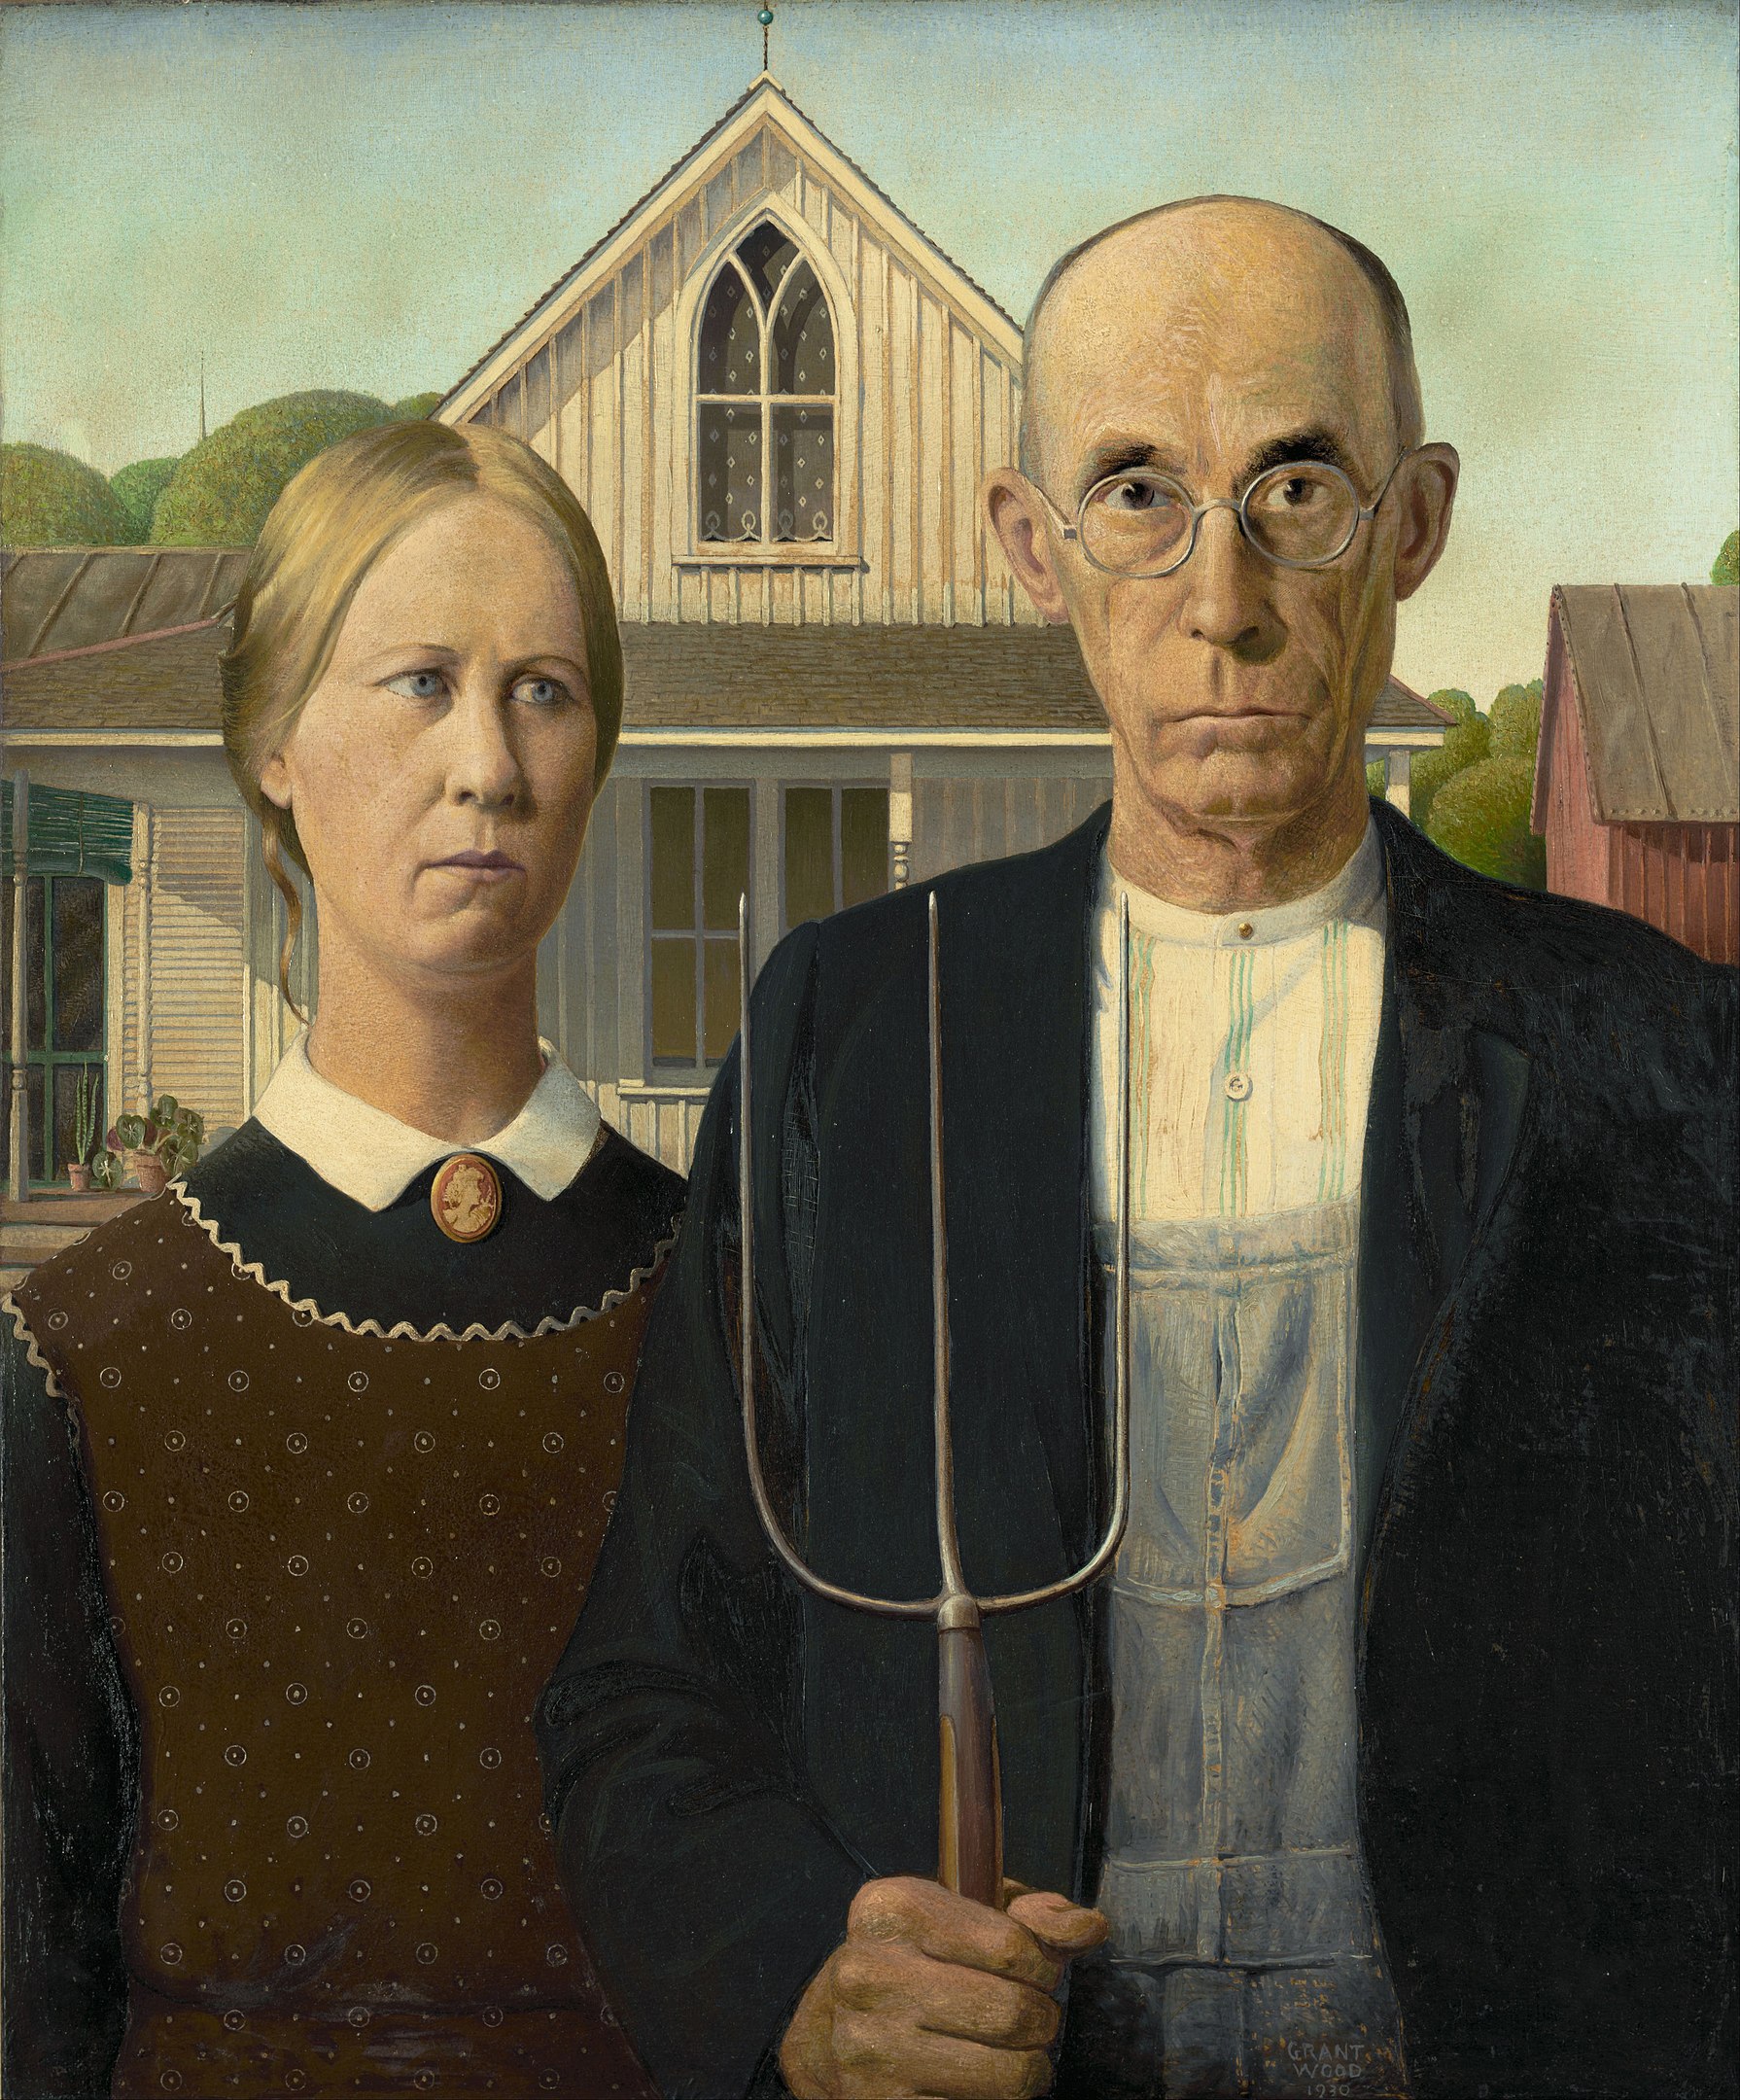 American Gothic by Grant Wood - 1930 - 74 x 62 cm Art Institute of Chicago